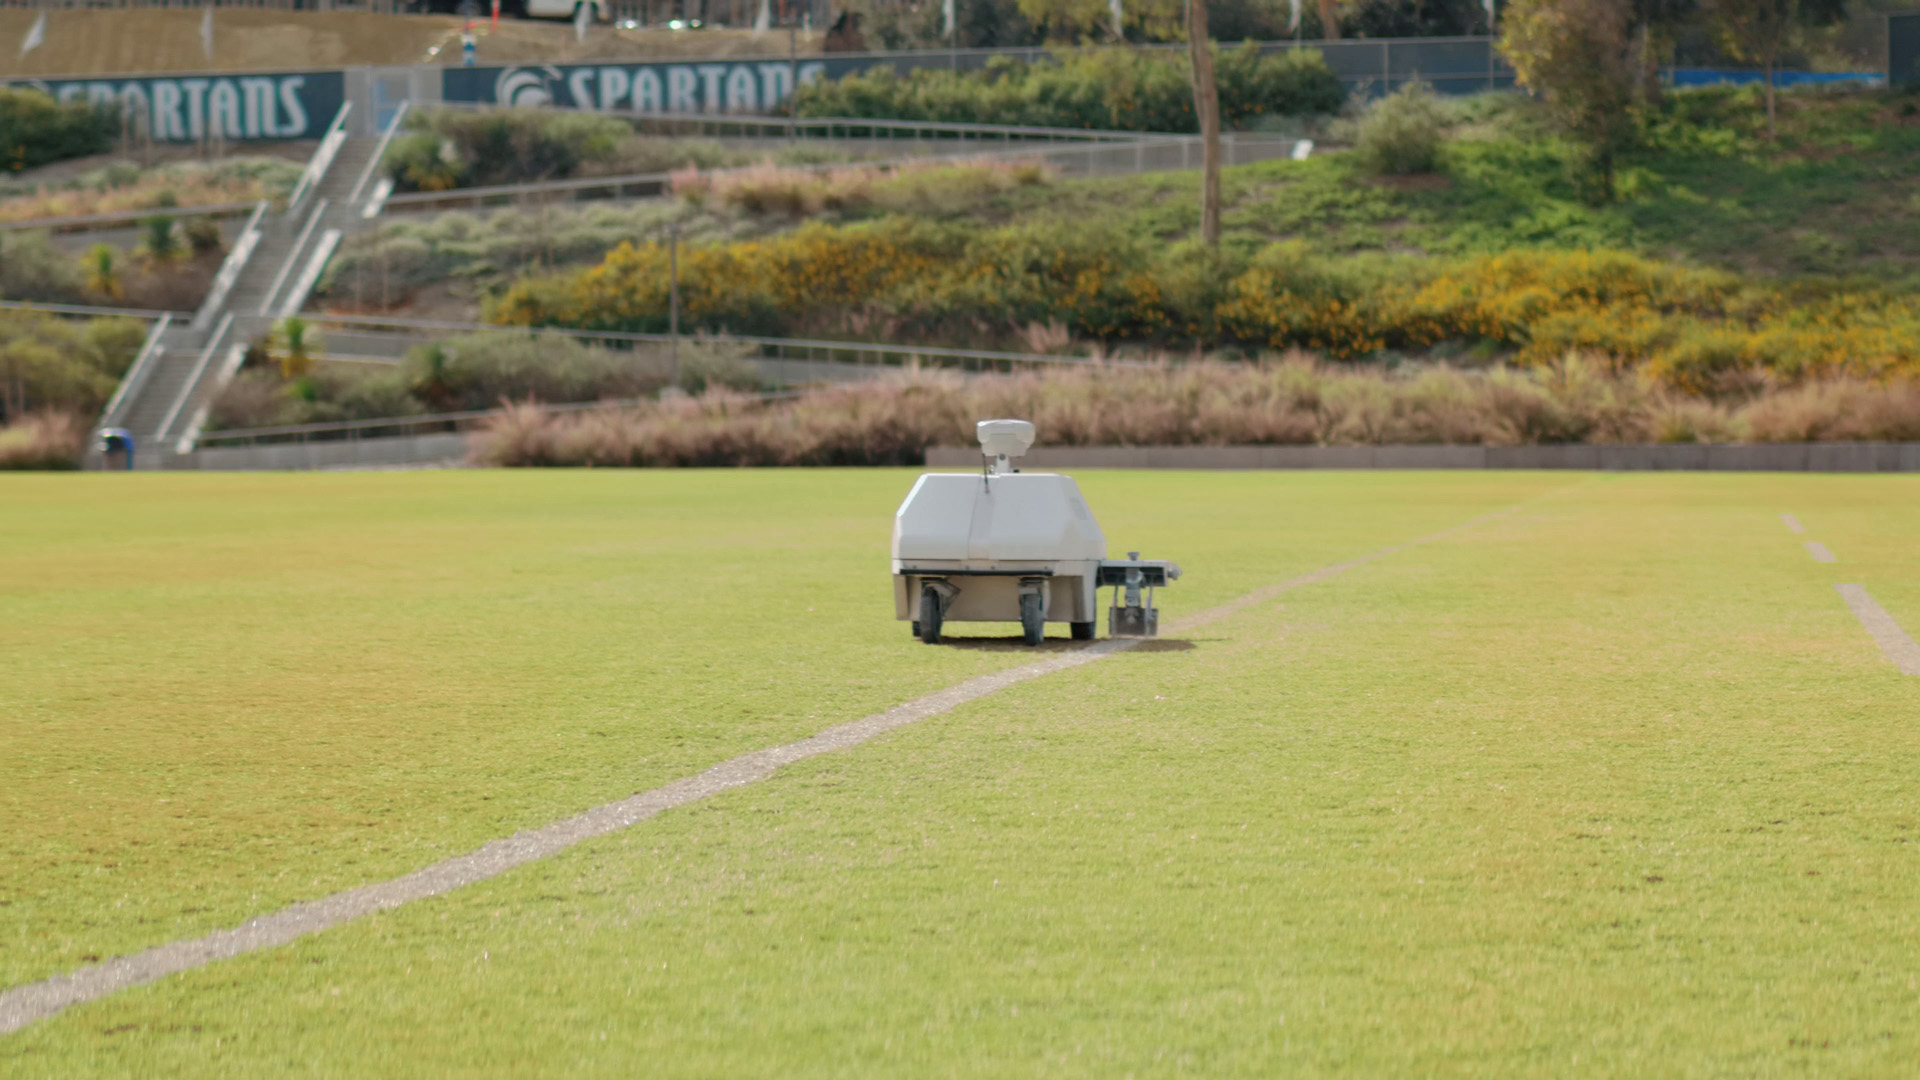 Miracostas autonomous line marking robot called Turf Tank painting a straight line